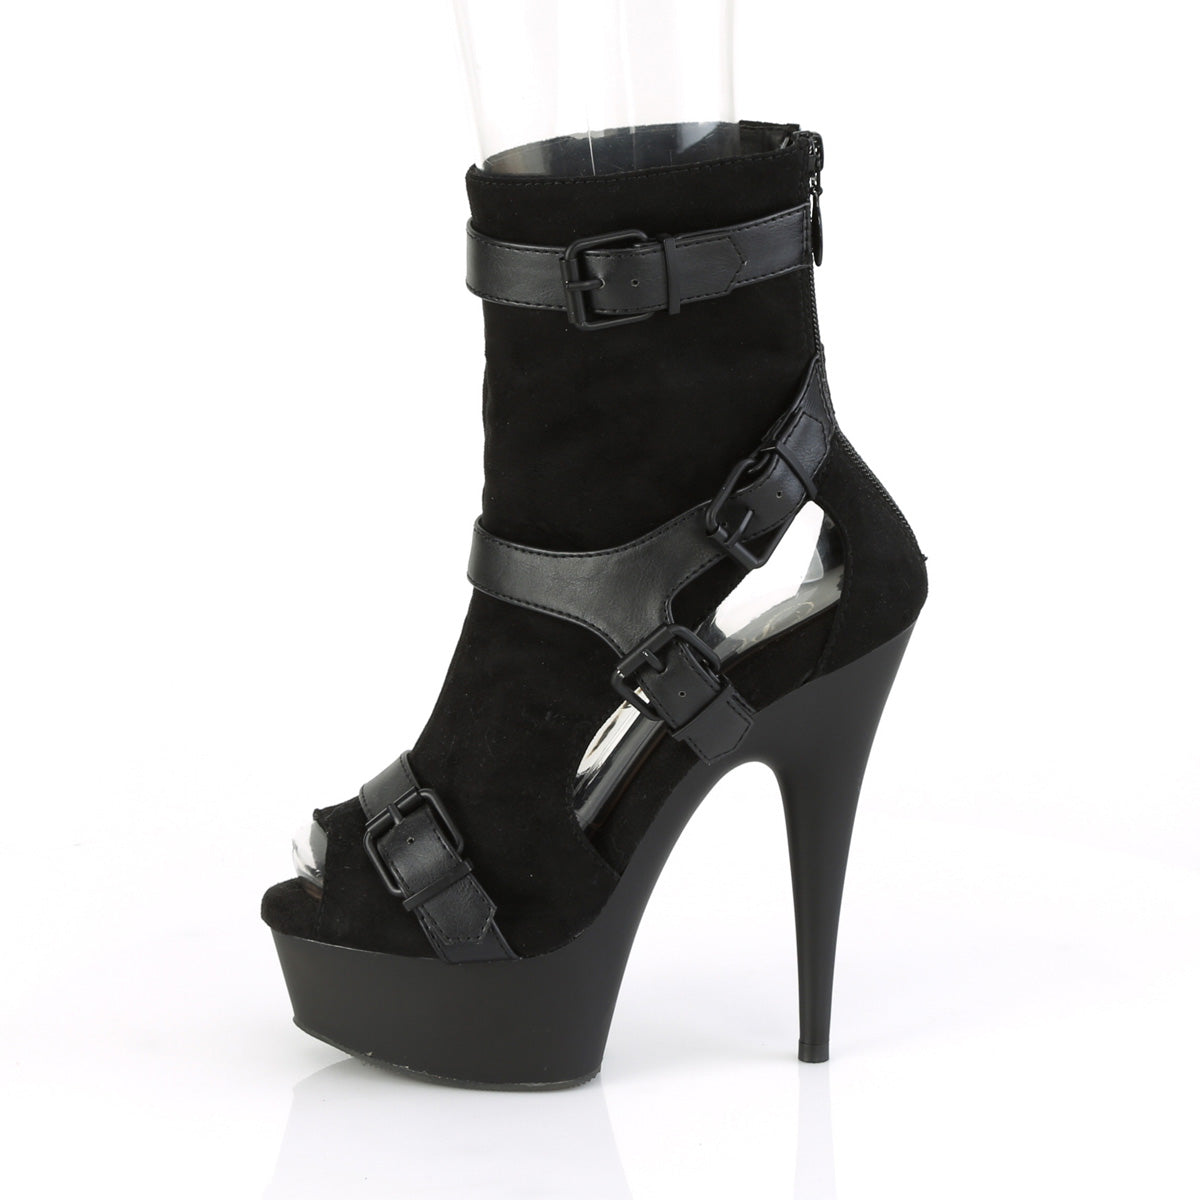 DELIGHT-1037 Pleaser Pole Dancing Shoes Ankle Boots Pleasers - Sexy Shoes Pole Dance Heels